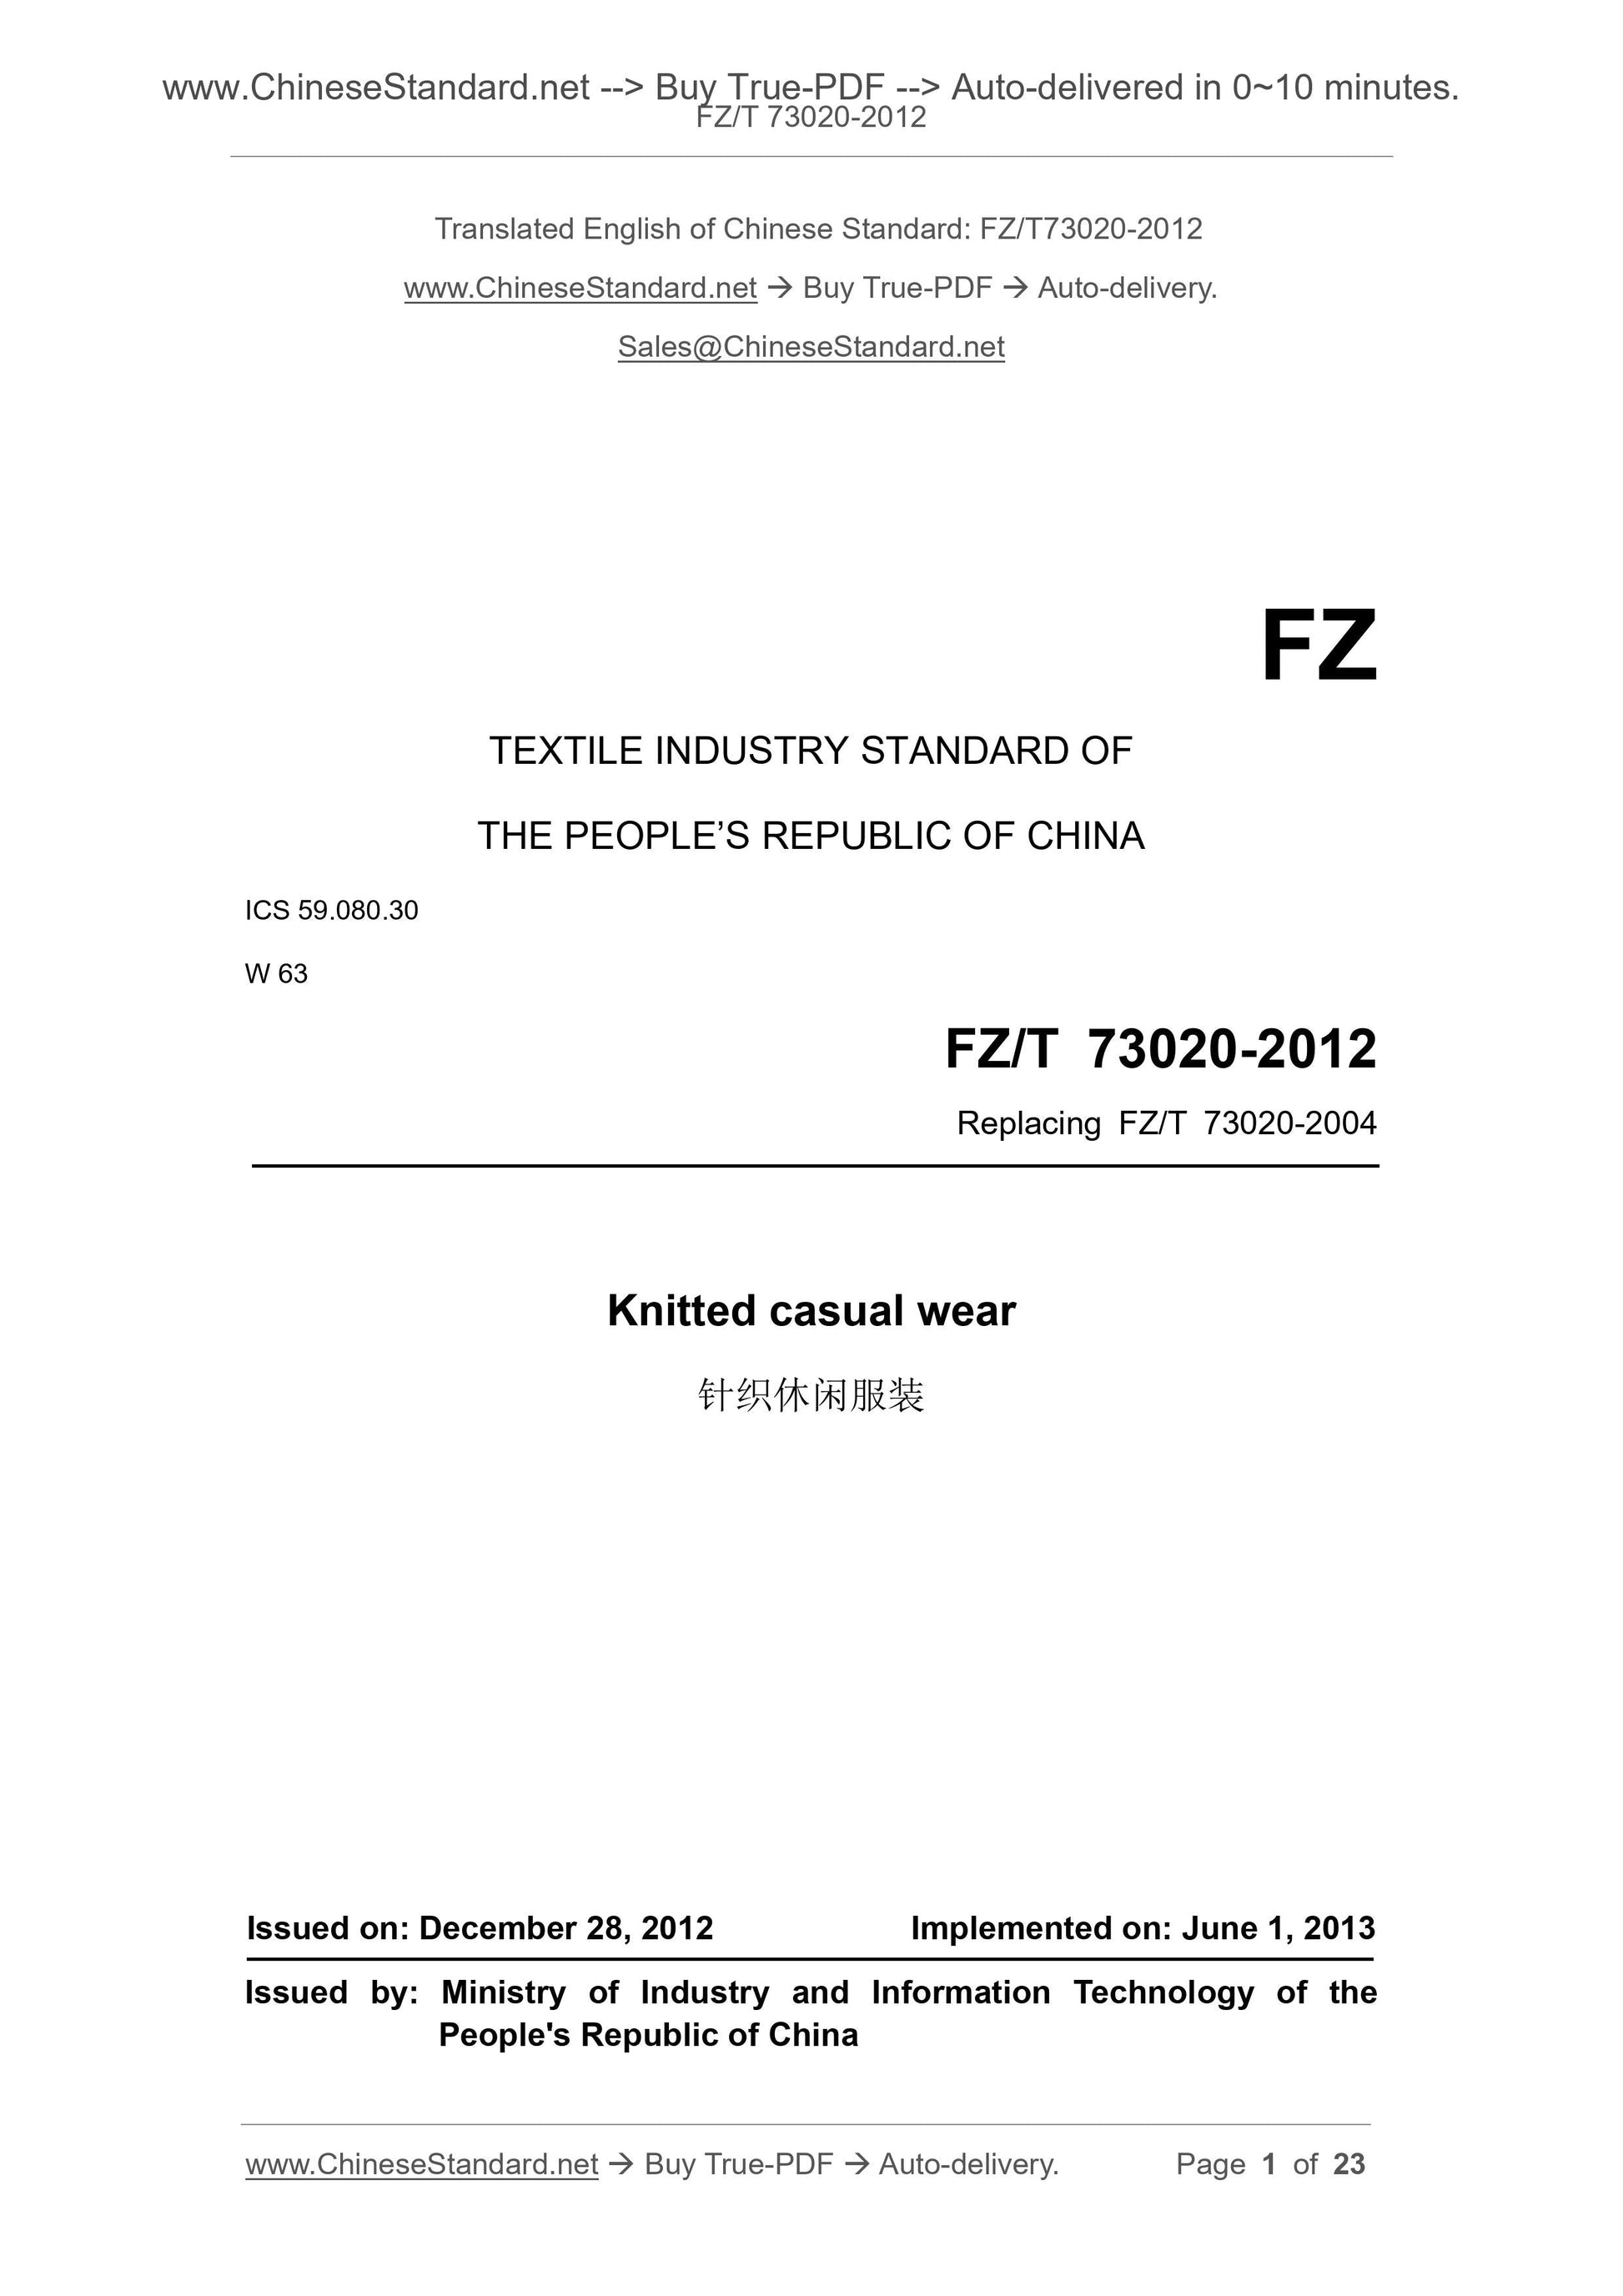 FZ/T 73020-2012 Page 1